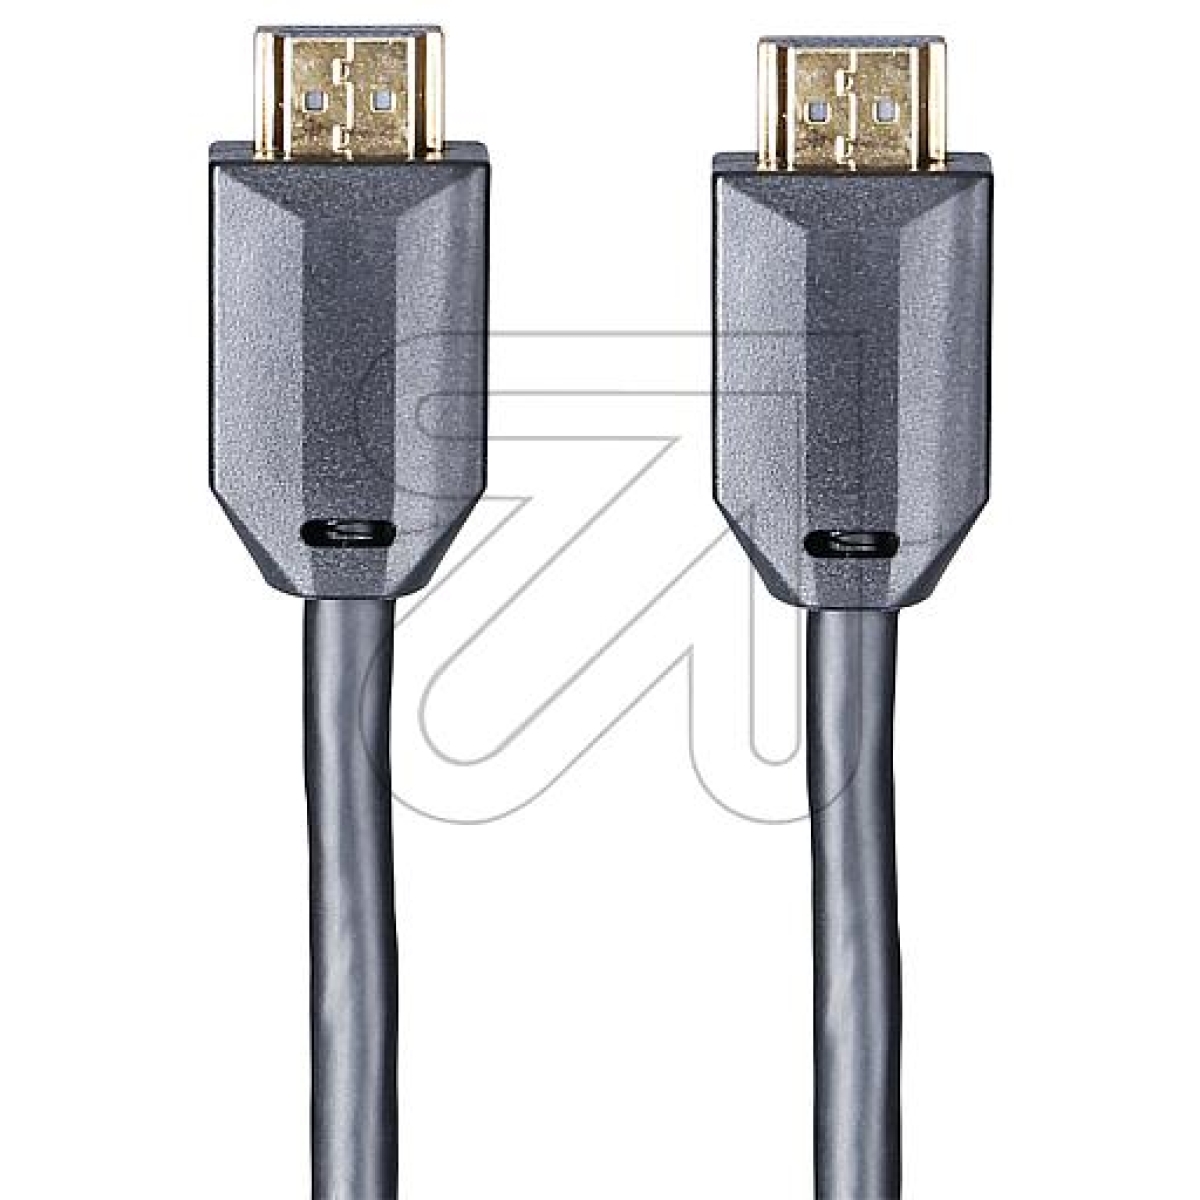 EGBUltra-HDMI cable 10K black 2 mArticle-No: 298375